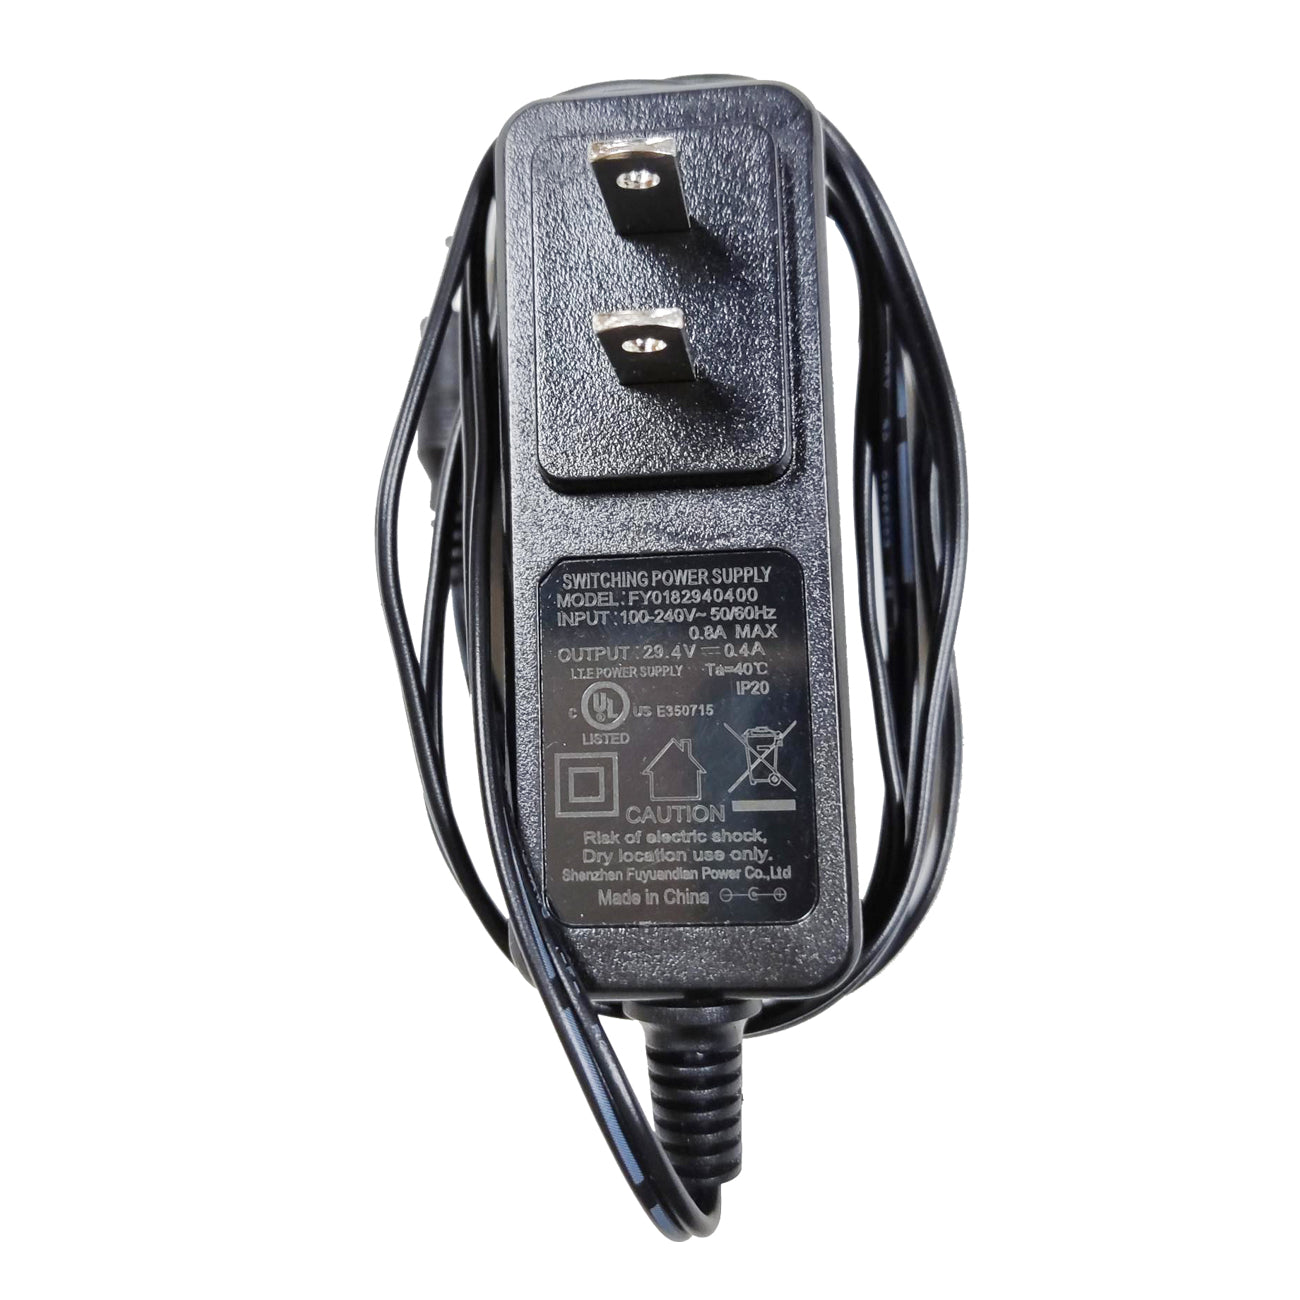 E-Scooter Charger (29.4V 0.4A) - GKS Scooter